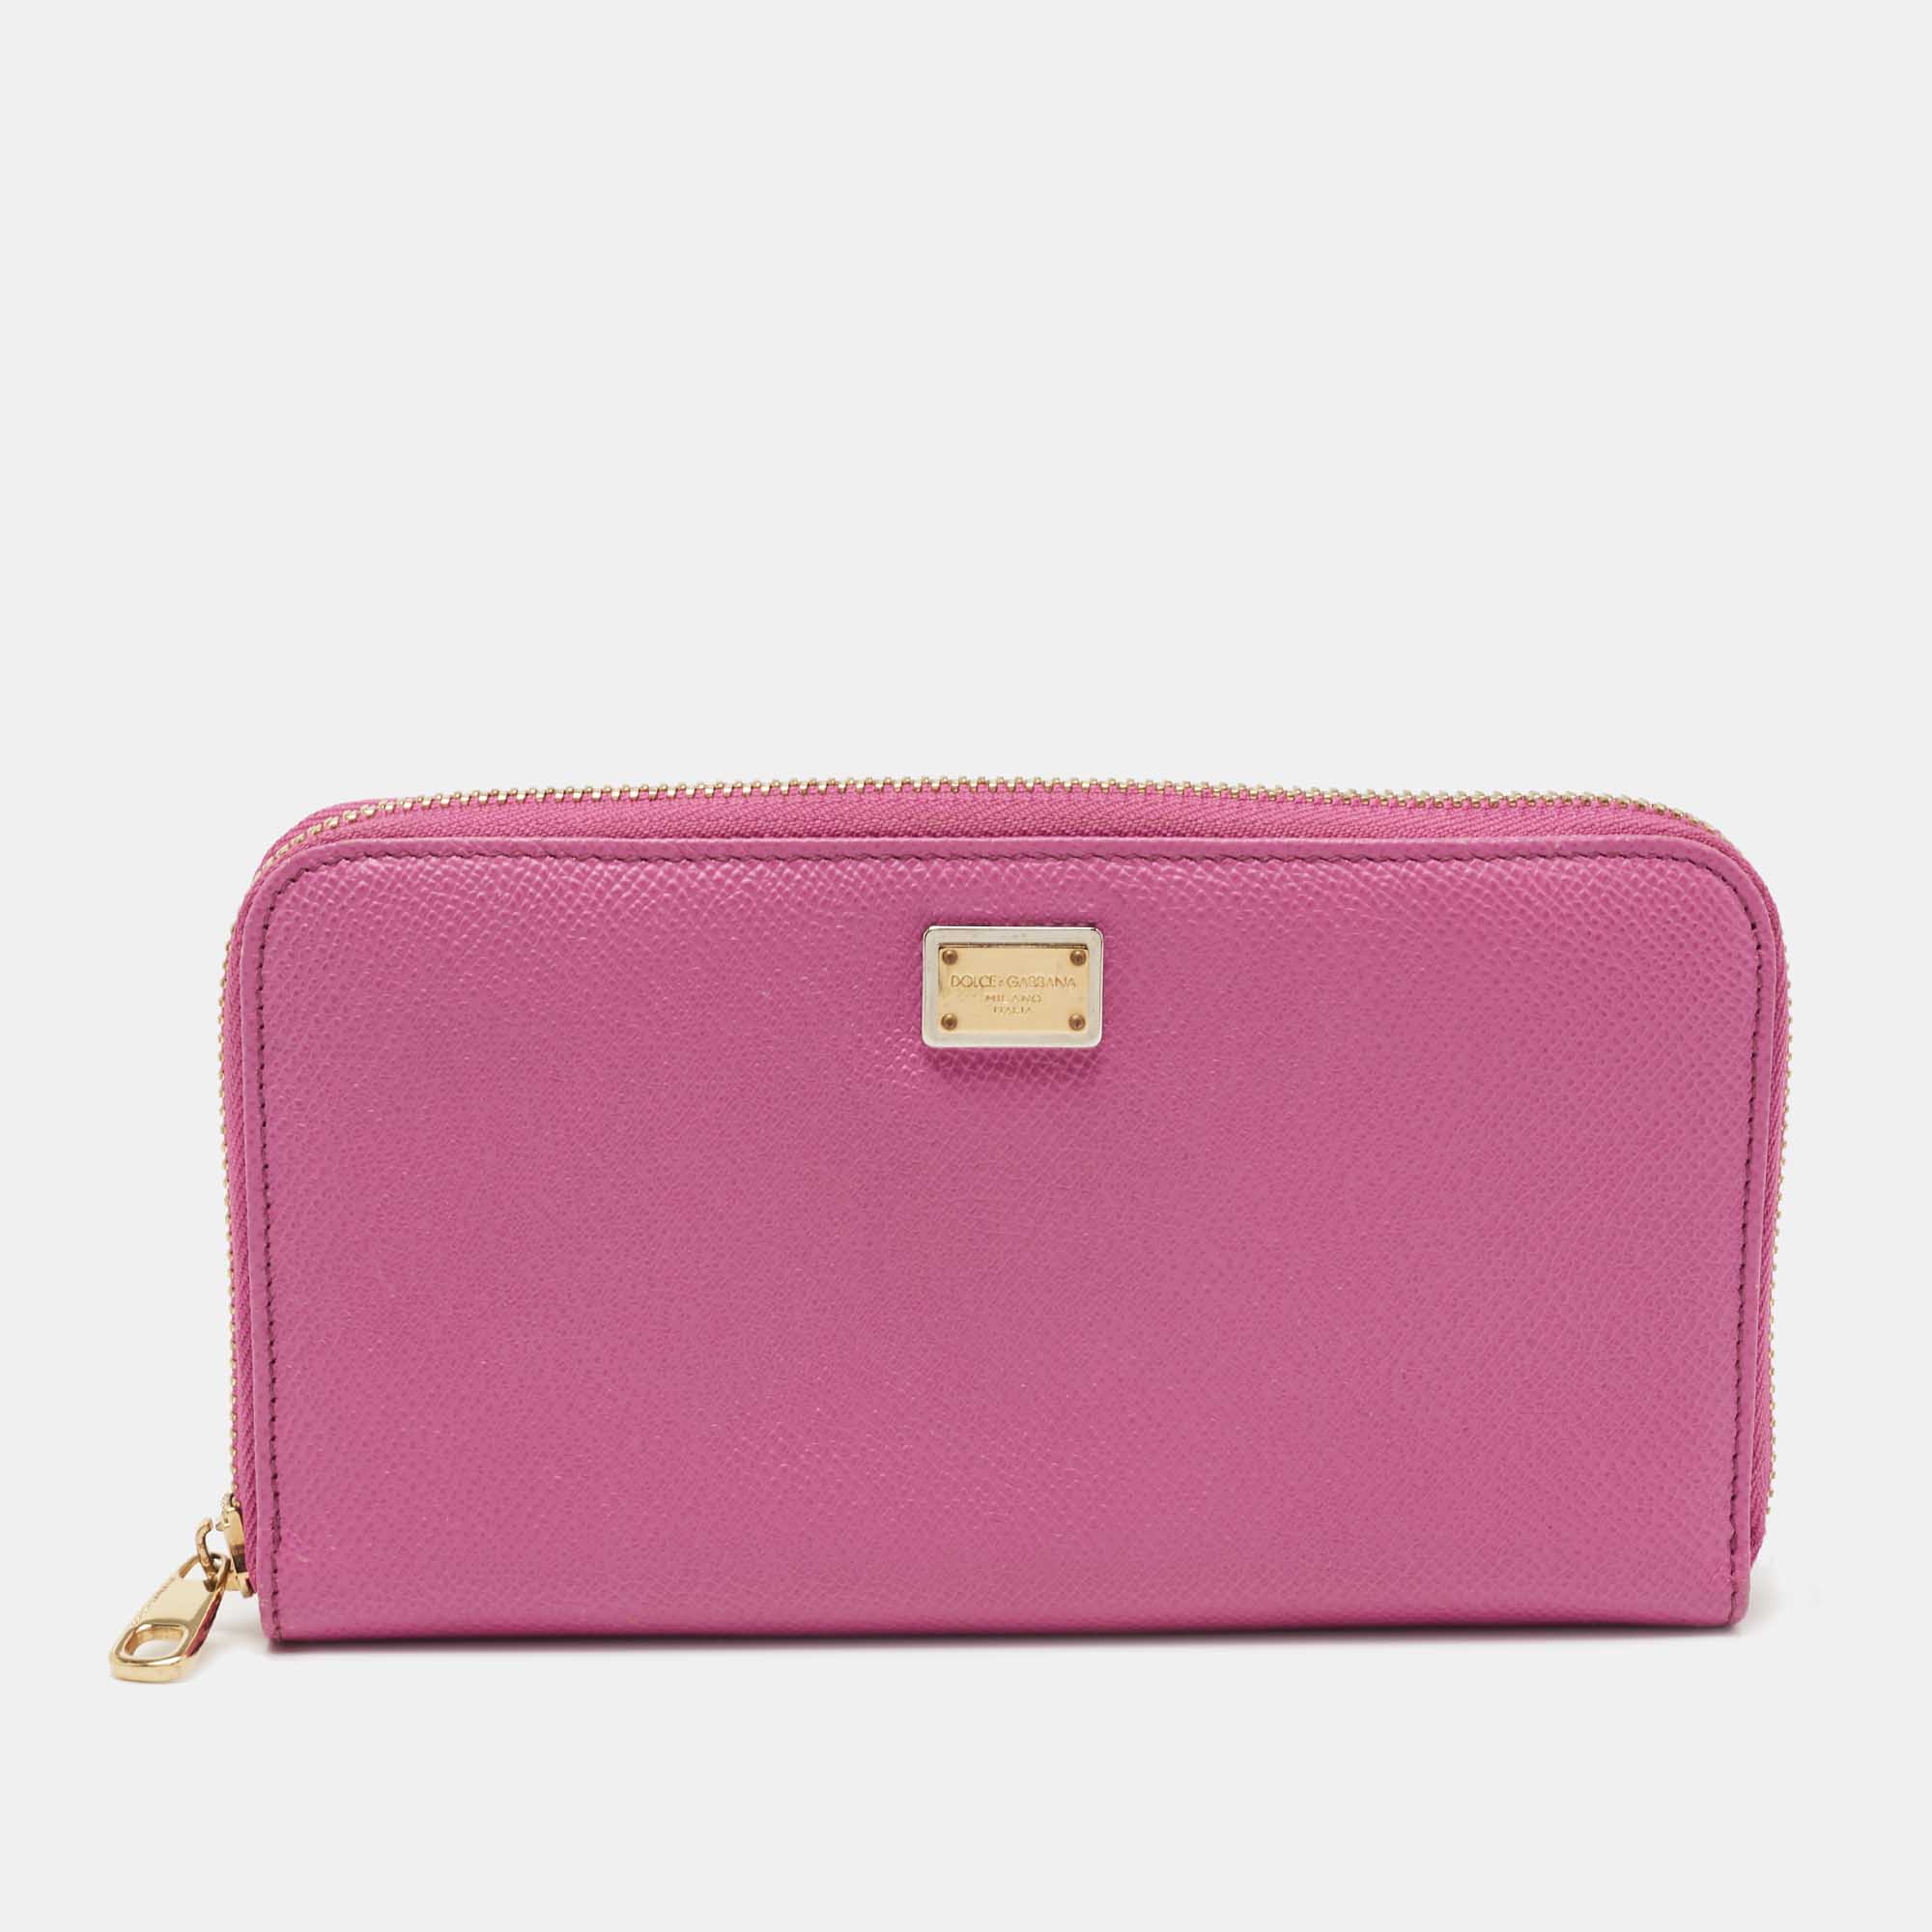 Pre-owned Dolce & Gabbana Pink Leather Zip Around Wallet